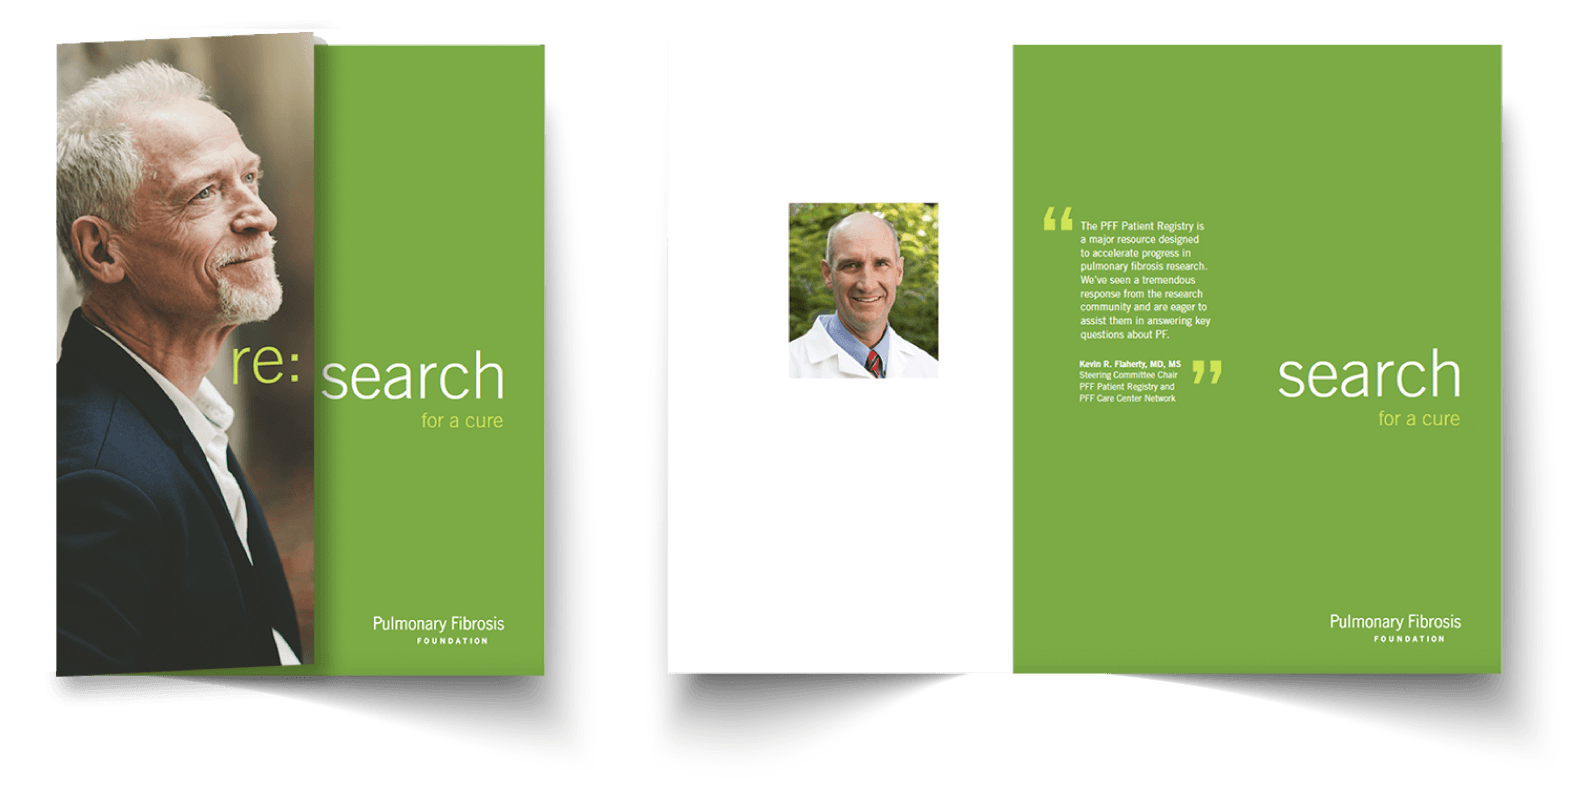 The Pulmonary Fibrosis Foundation report covers